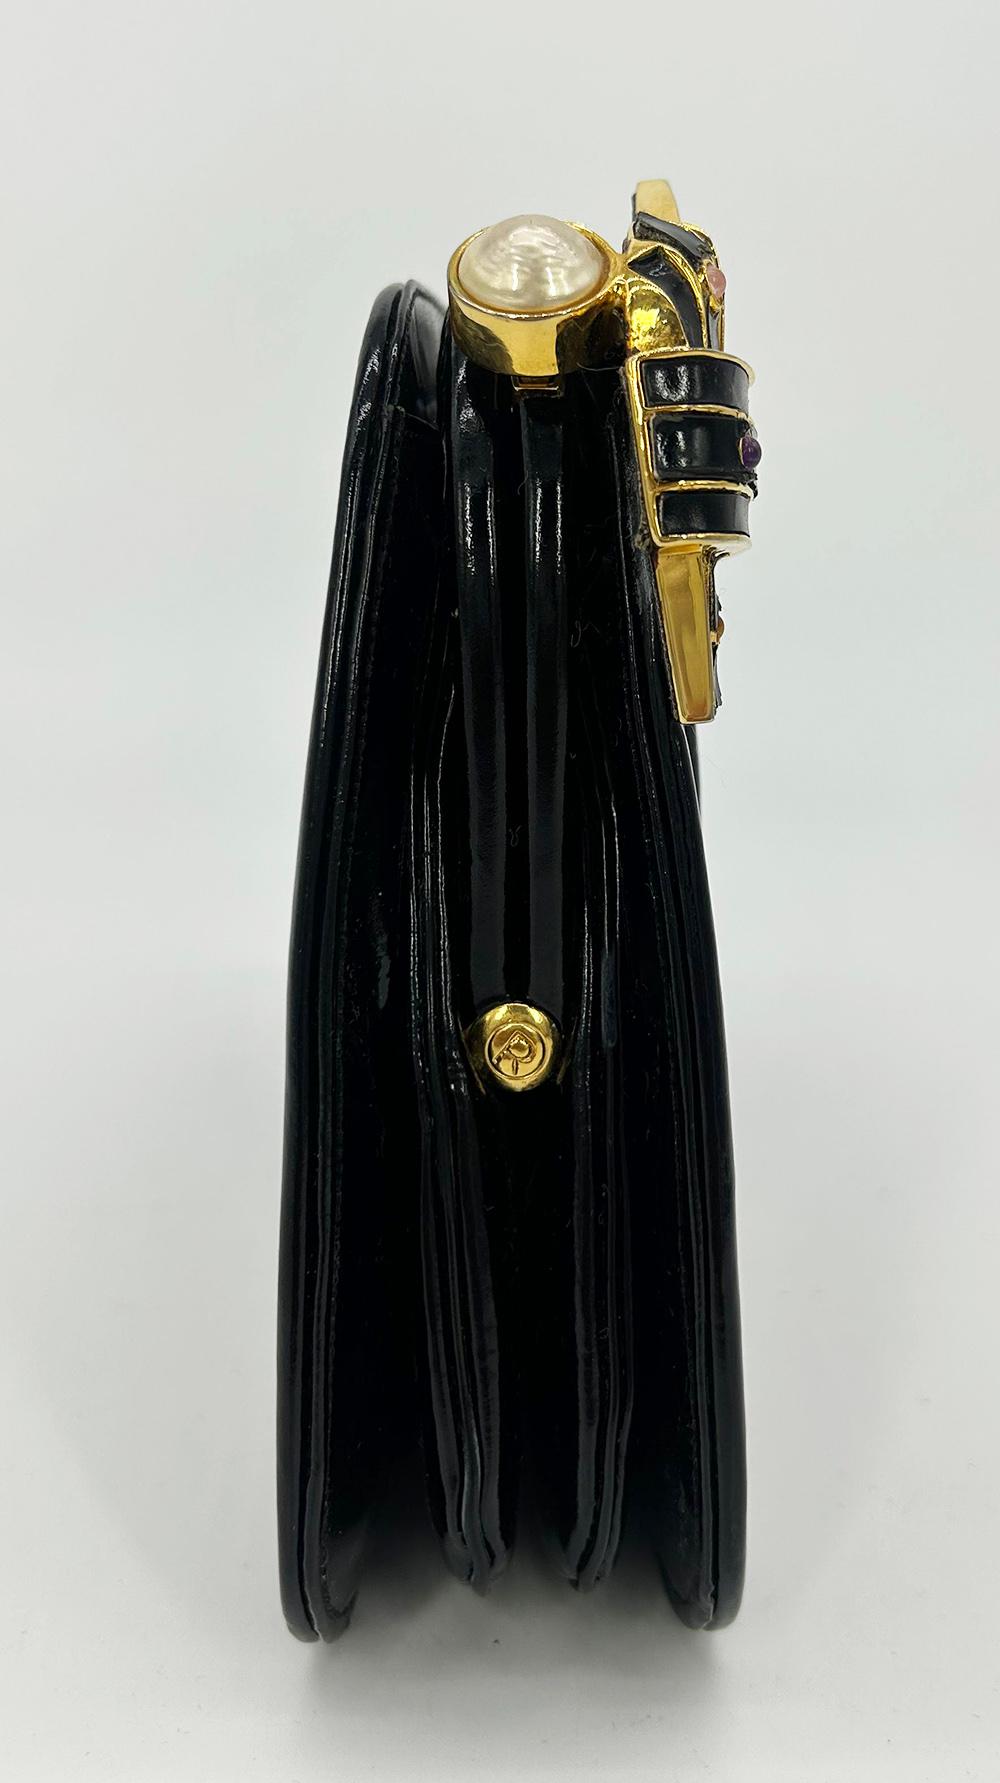 Judith Leiber Black Patent Leather Clutch in good vintage condition. Black patent leather in unique diagonal pleated design along front side trimmed with gold hardware. Black enamel and gold knot hardware detail along top front right with tiny multi